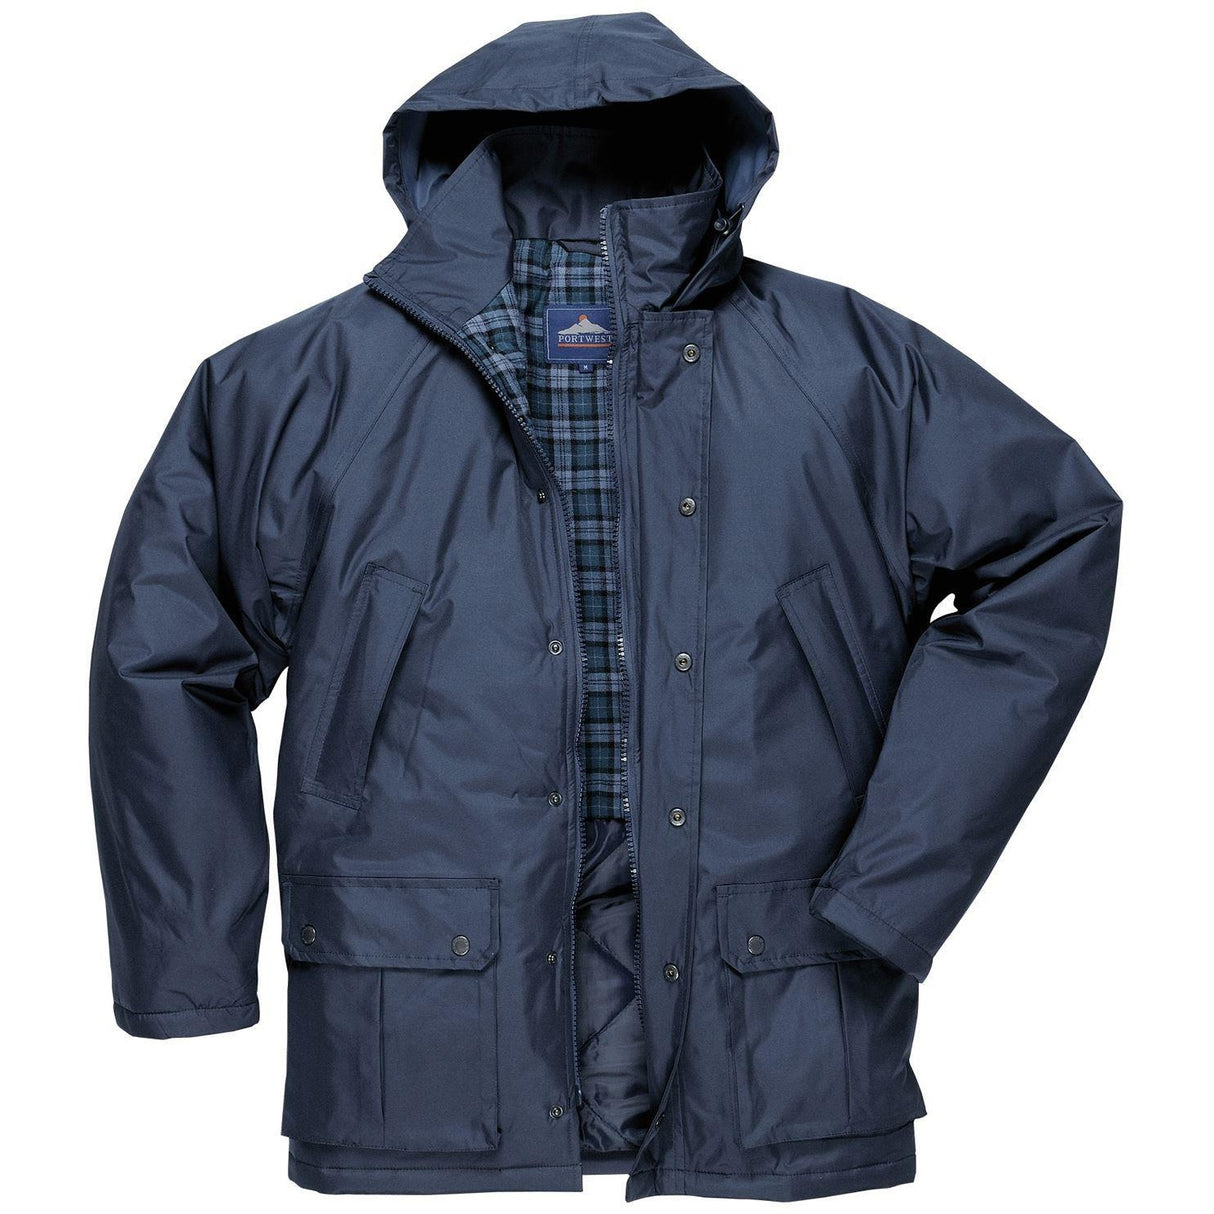 Portwest Dundee Lined Jacket